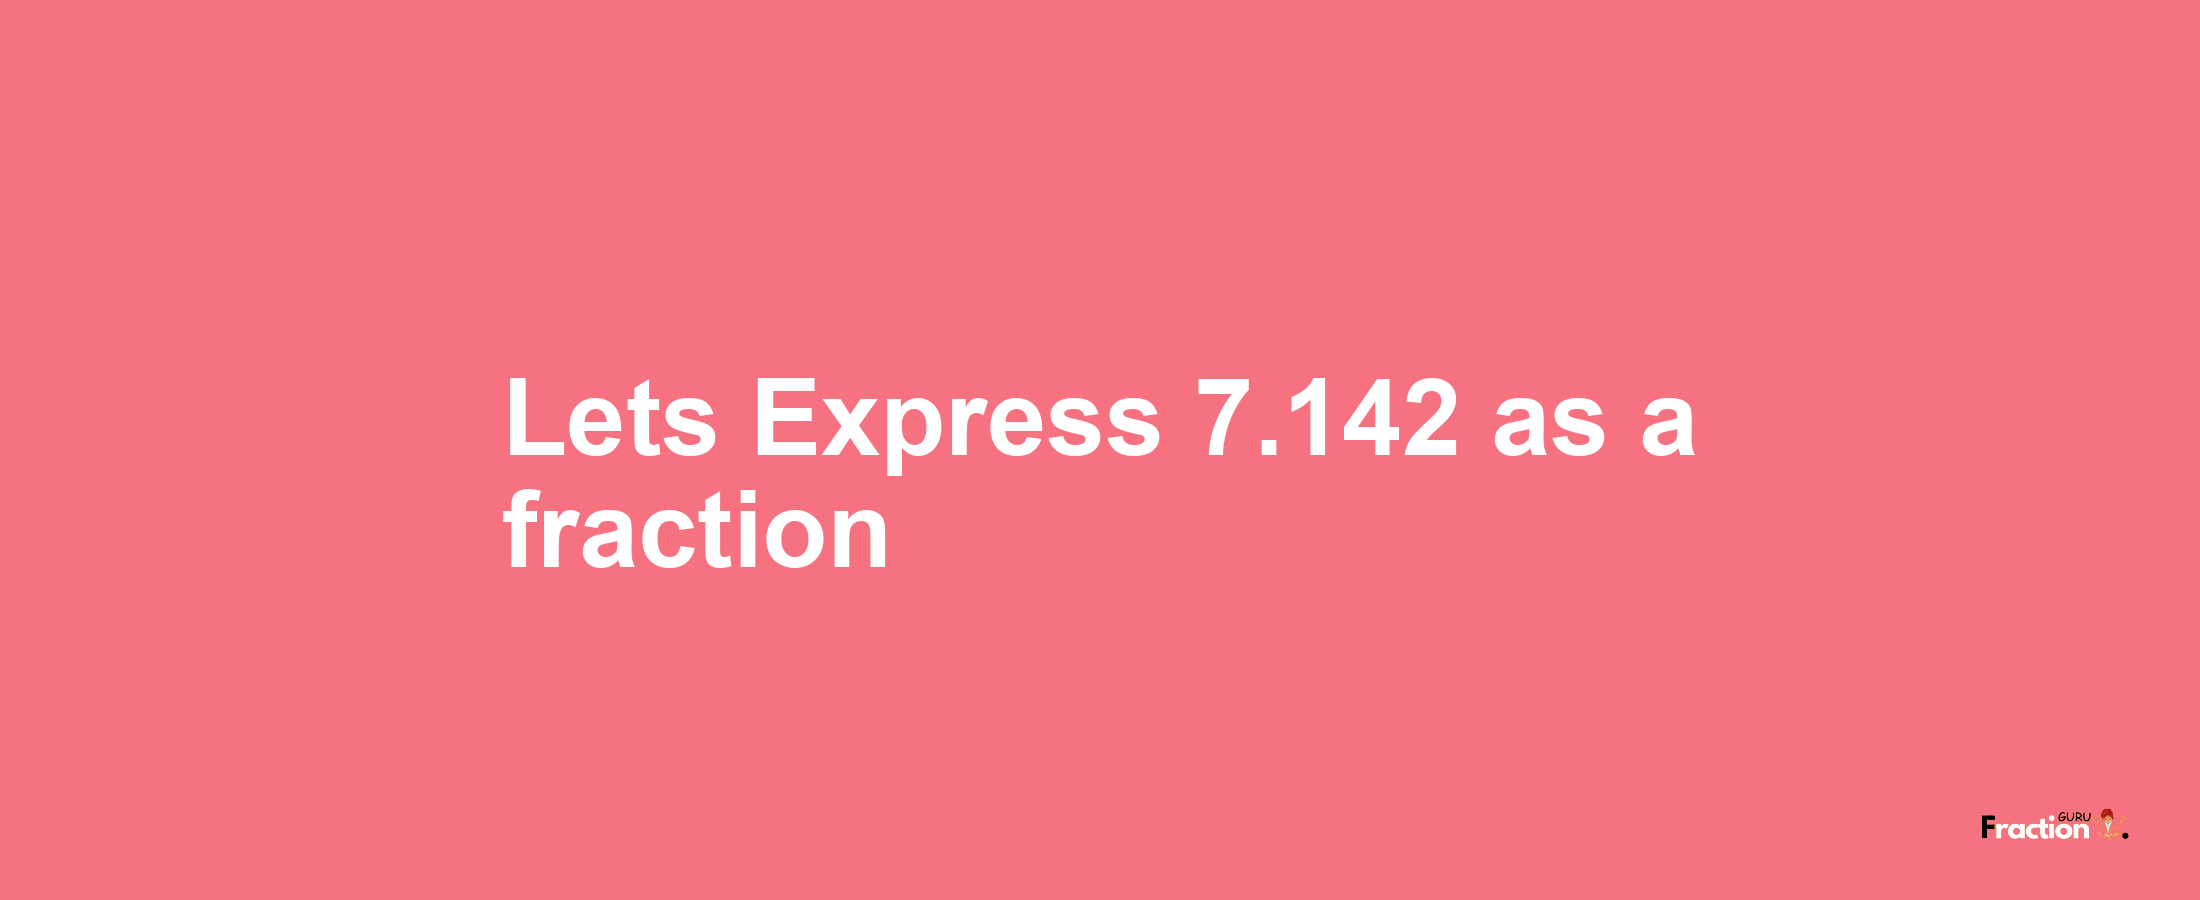 Lets Express 7.142 as afraction